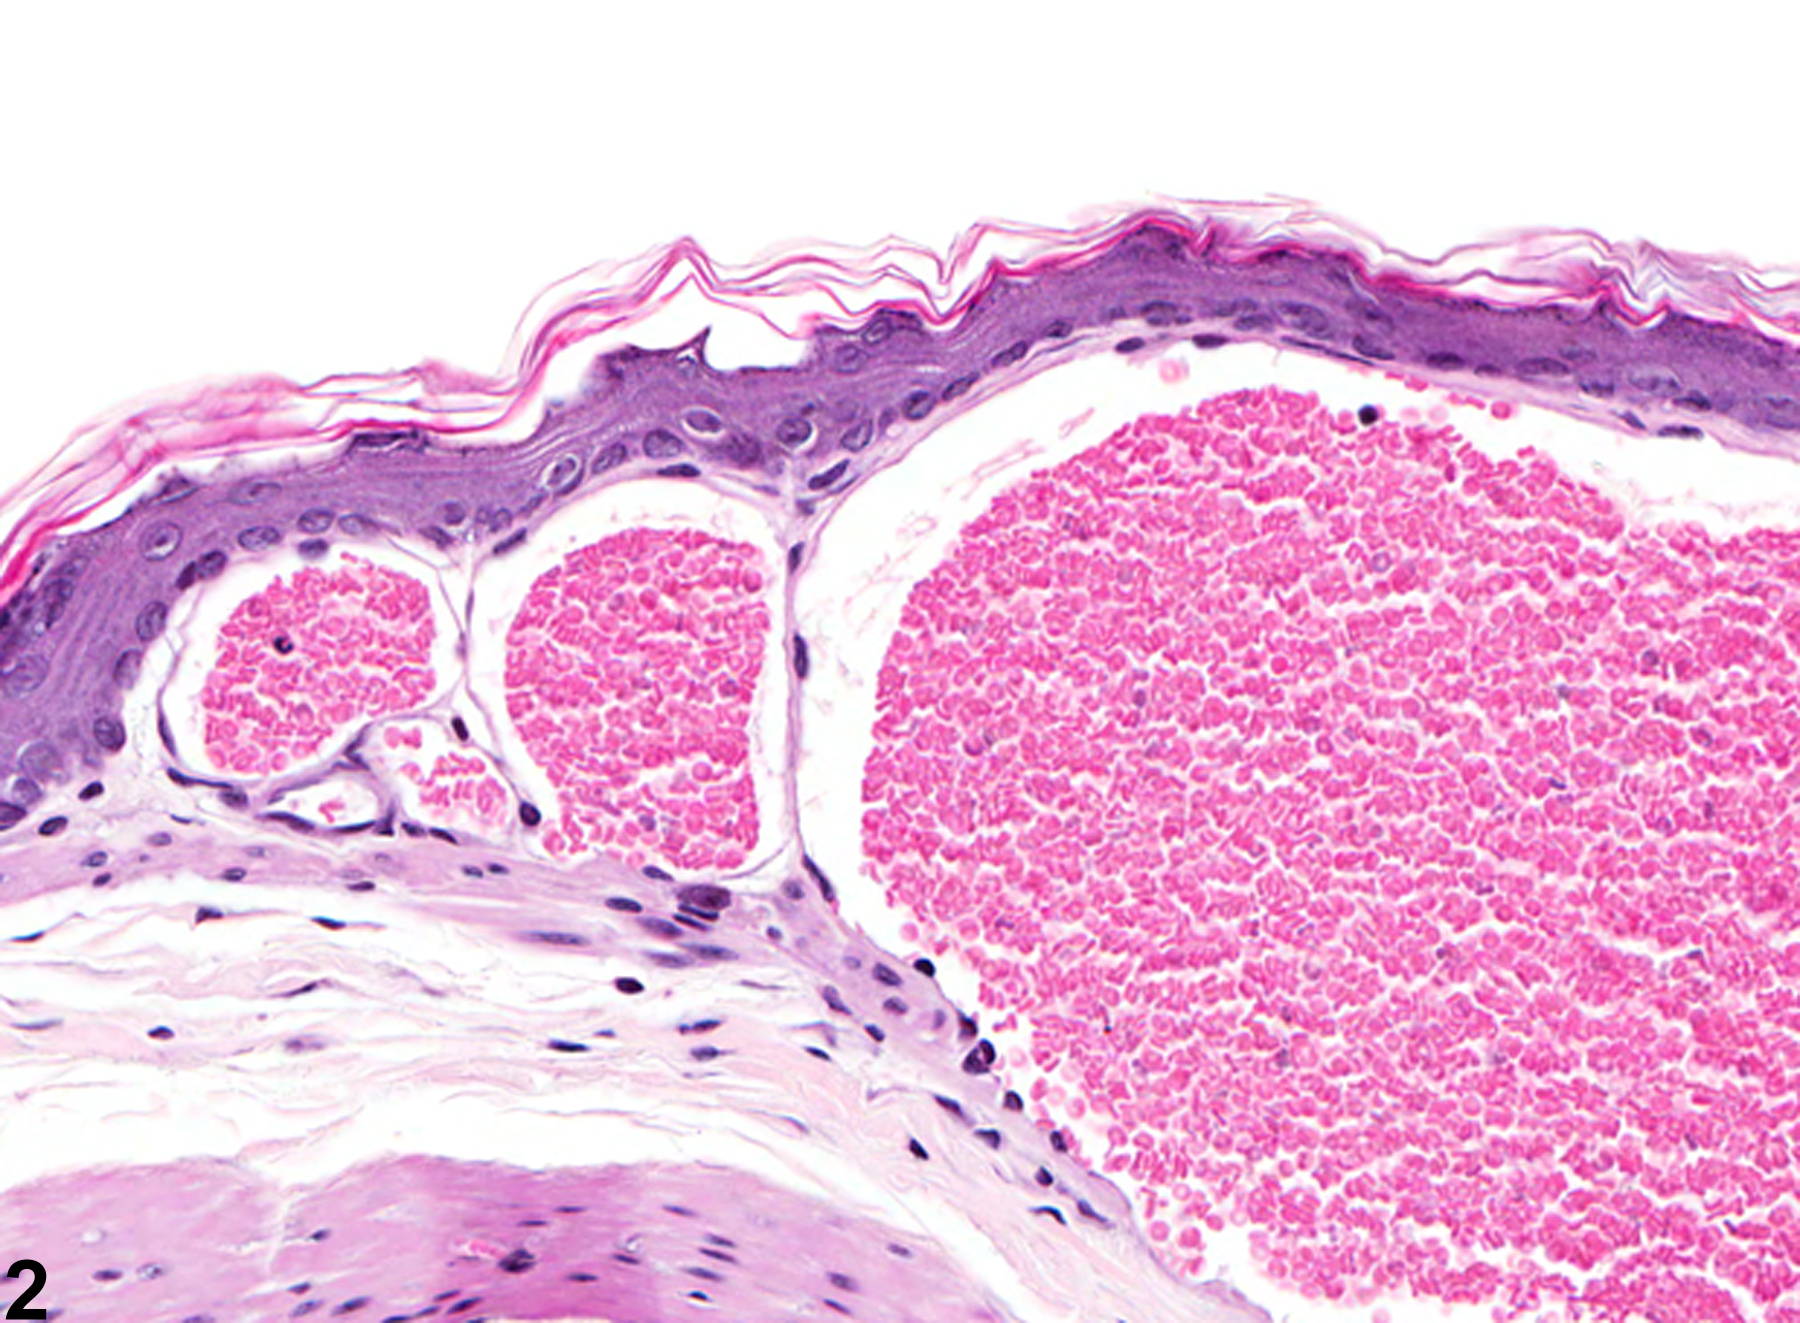 Image of angiectasis in the forestomach from a male B6C3F1 mouse in a chronic study